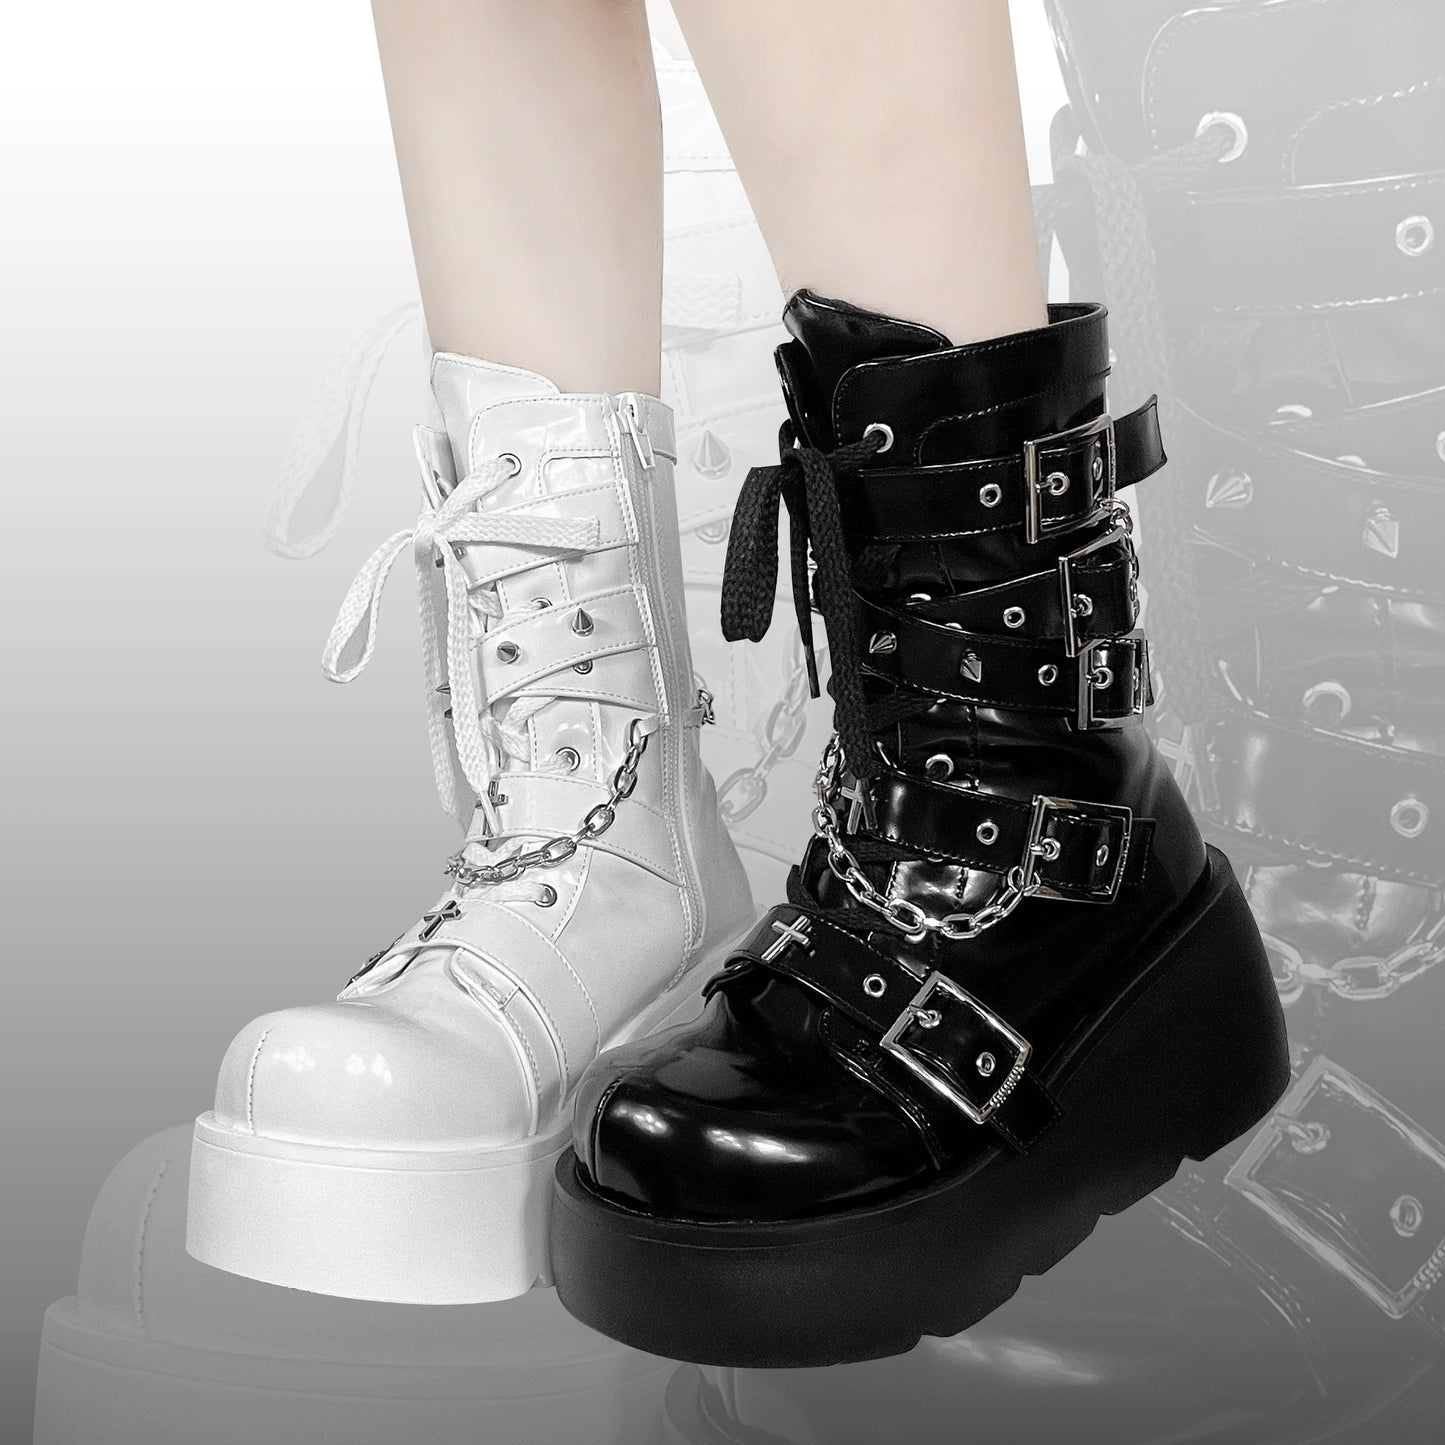 Y2K Spicy Girl Cross Black White Platform Shoes Boots 28962:343872